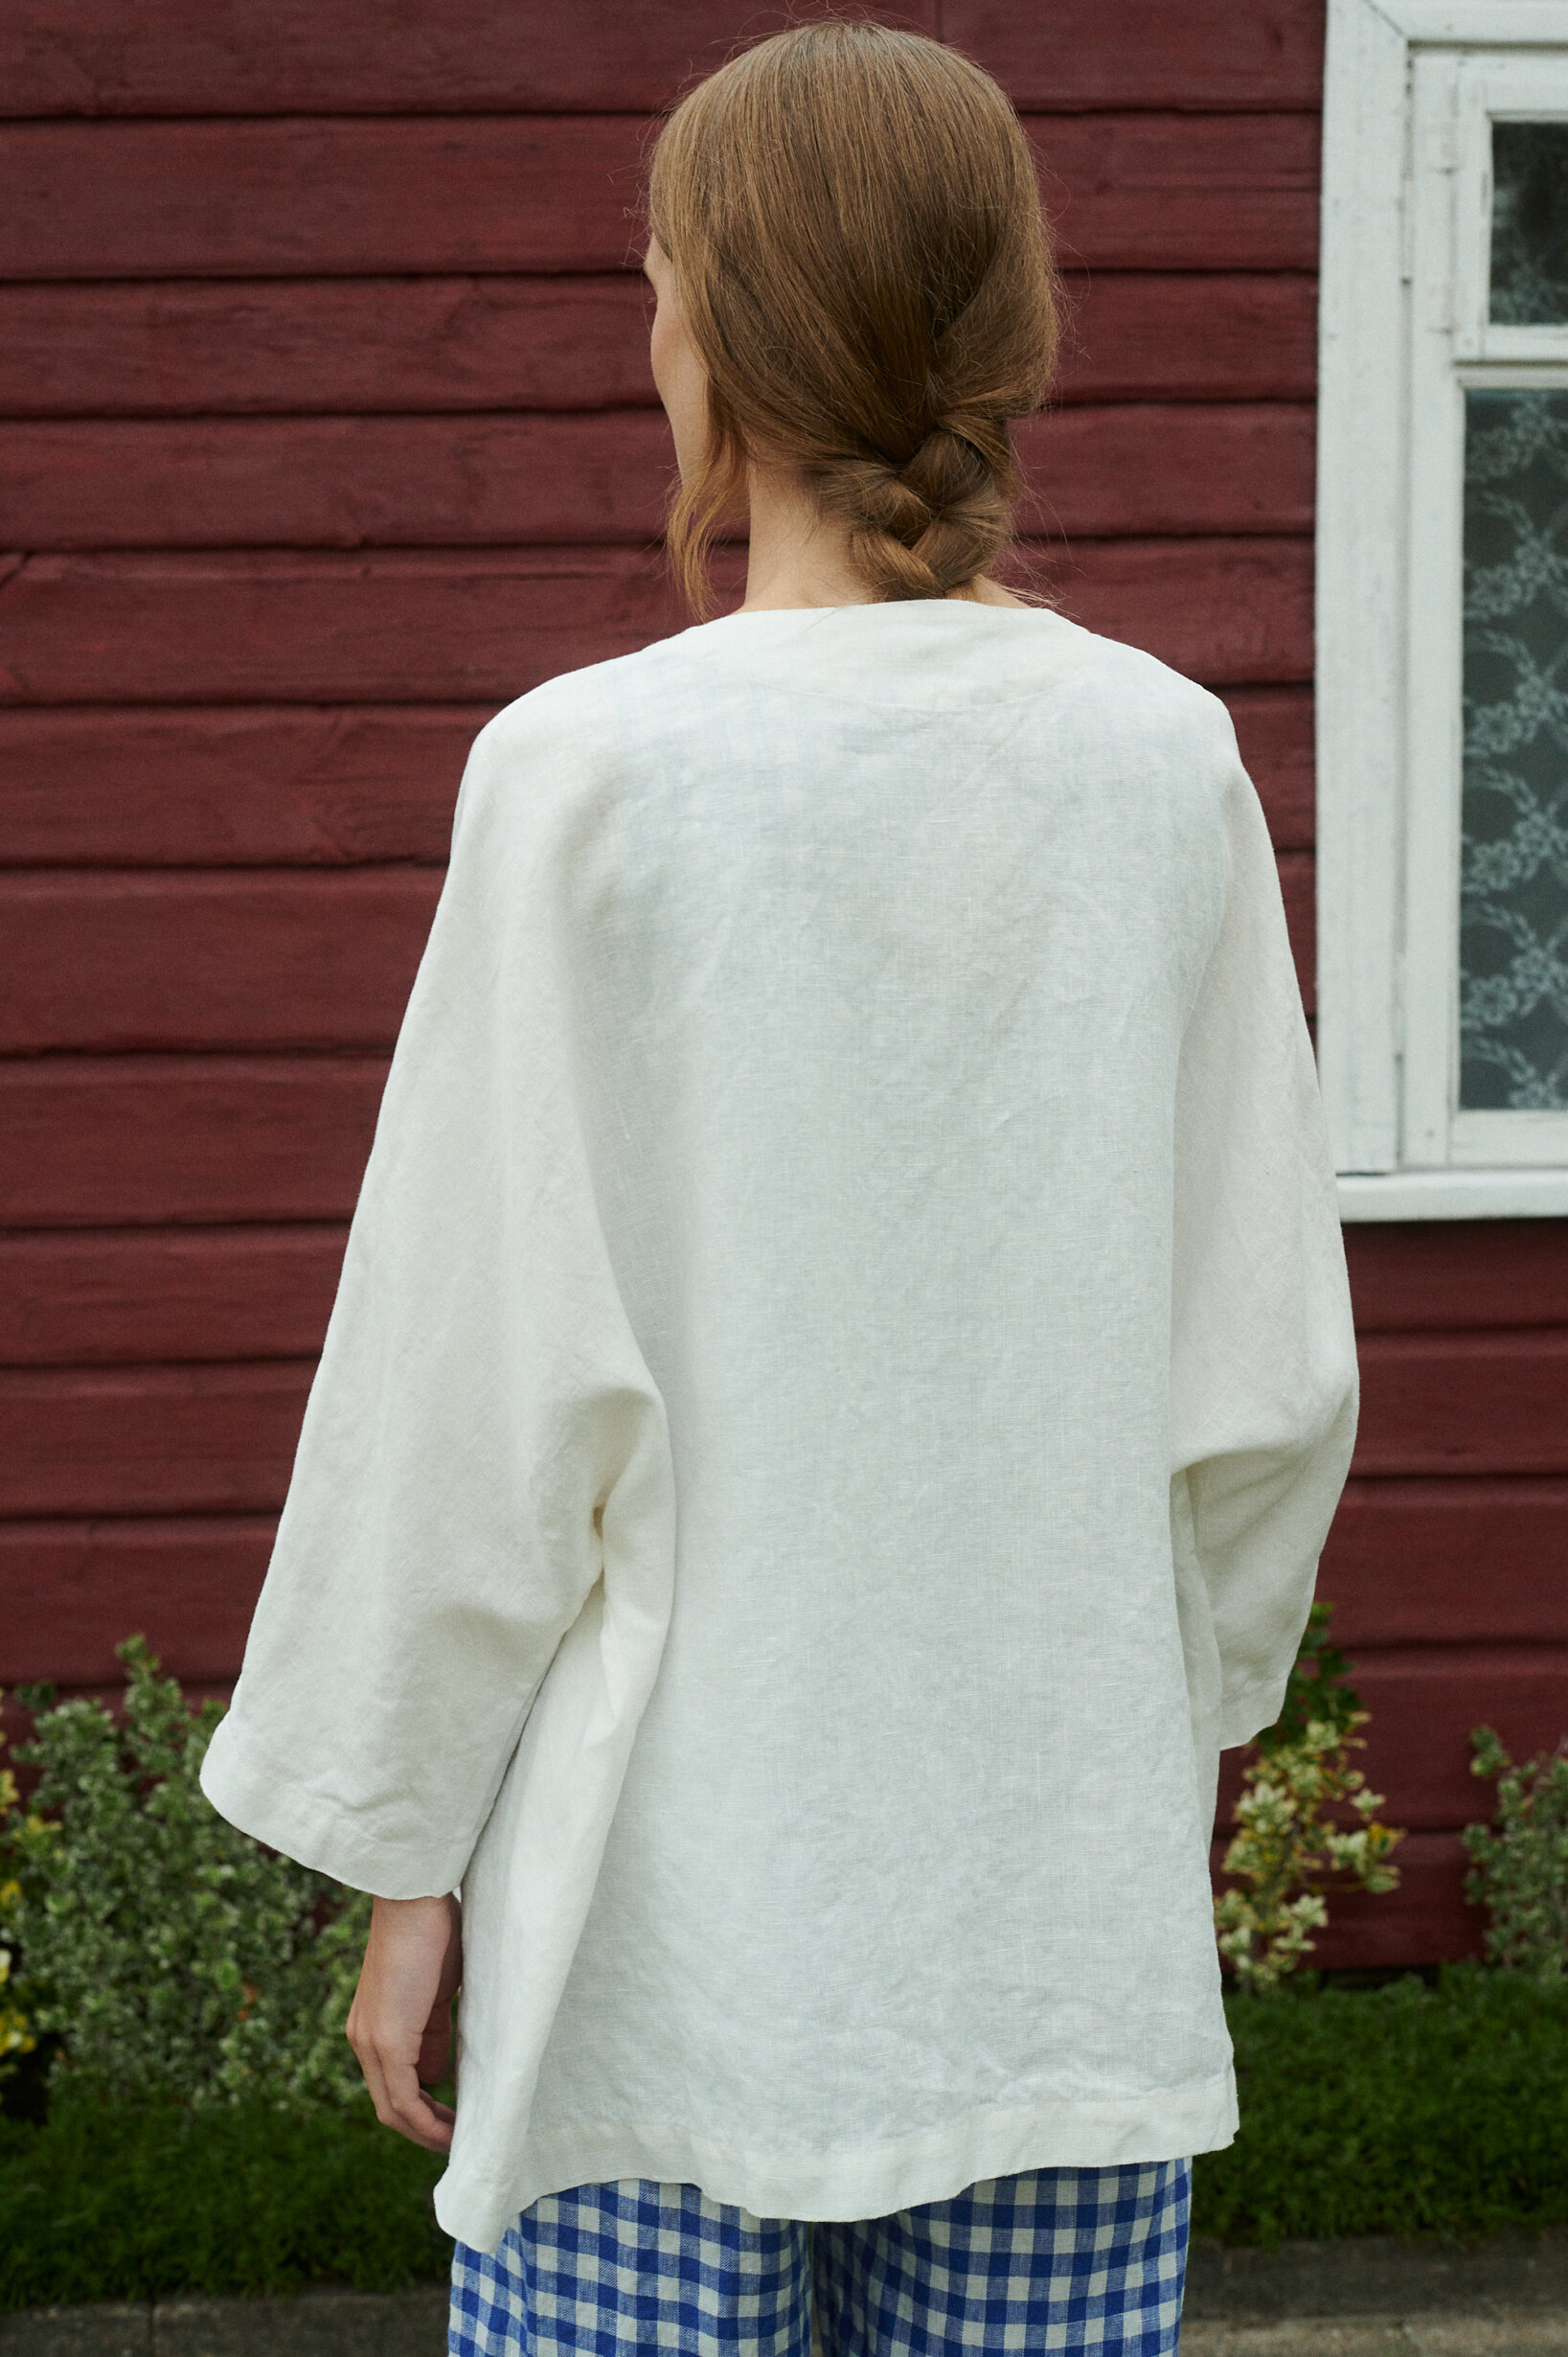 the back view of a model wearing milky white linen jacket